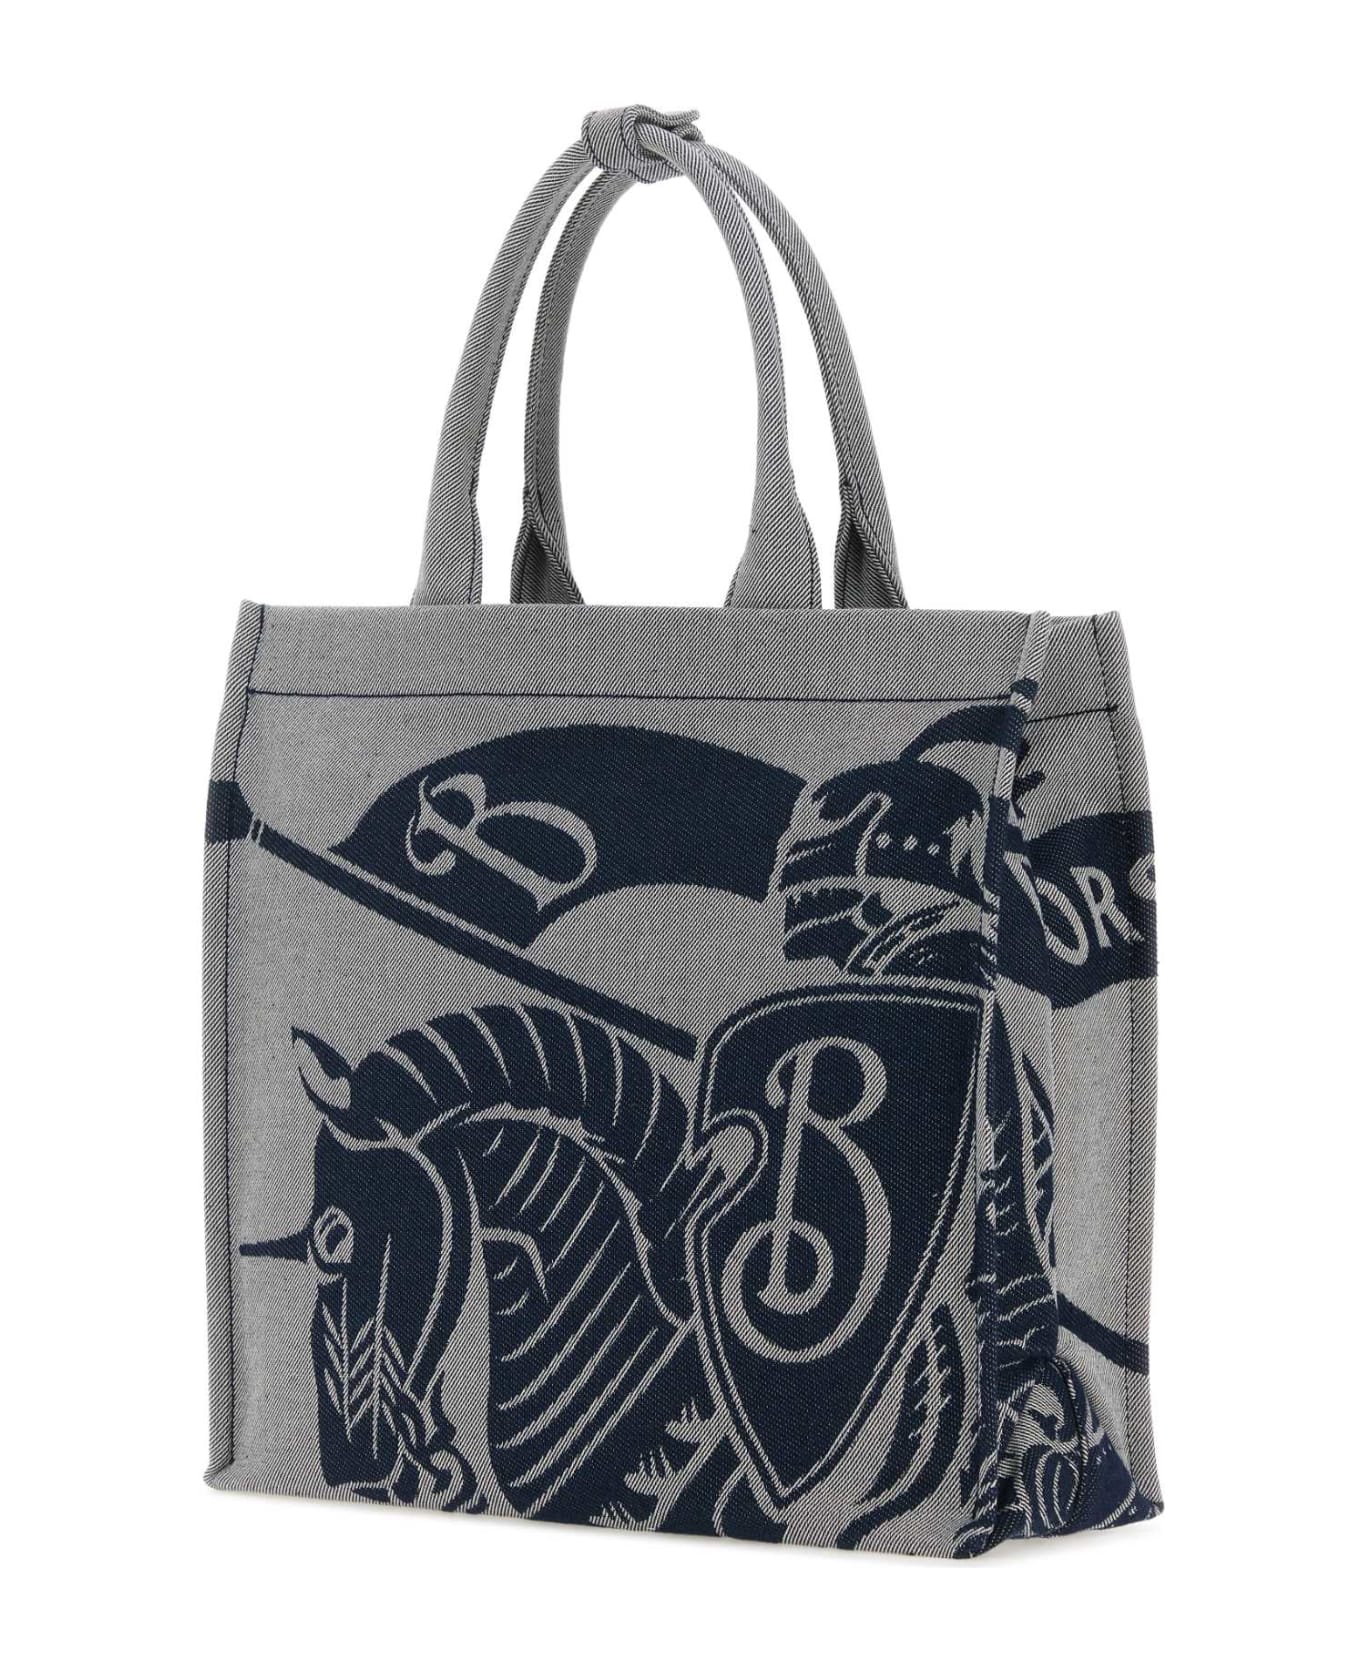 Burberry Embroidered Canvas Shopping Bag - KNIGHT